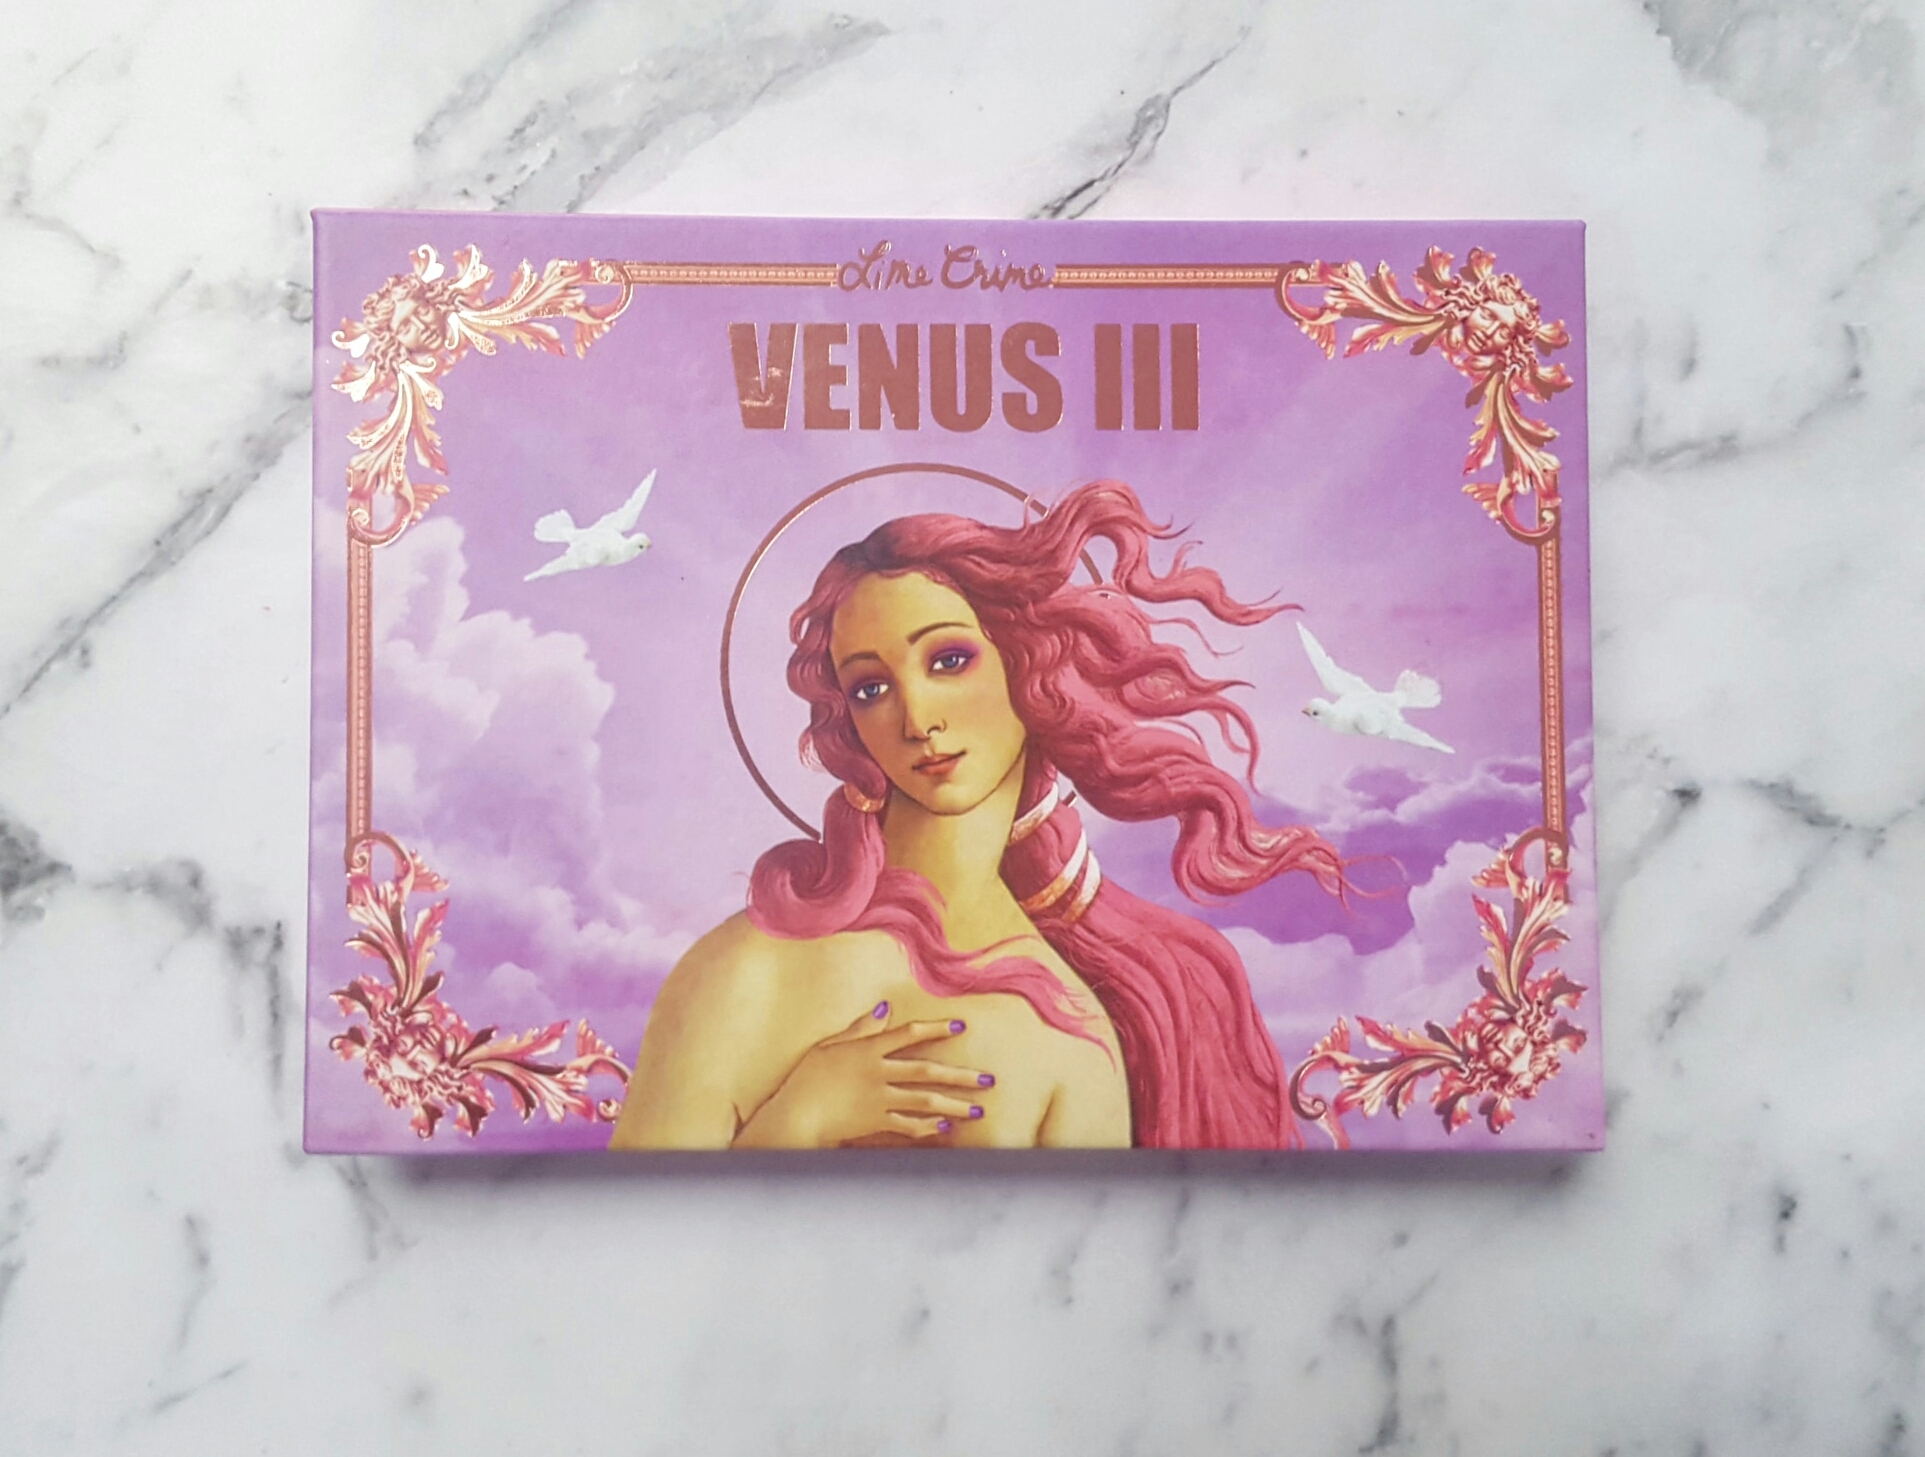 Limecrime Venus 3: Swatches and Review